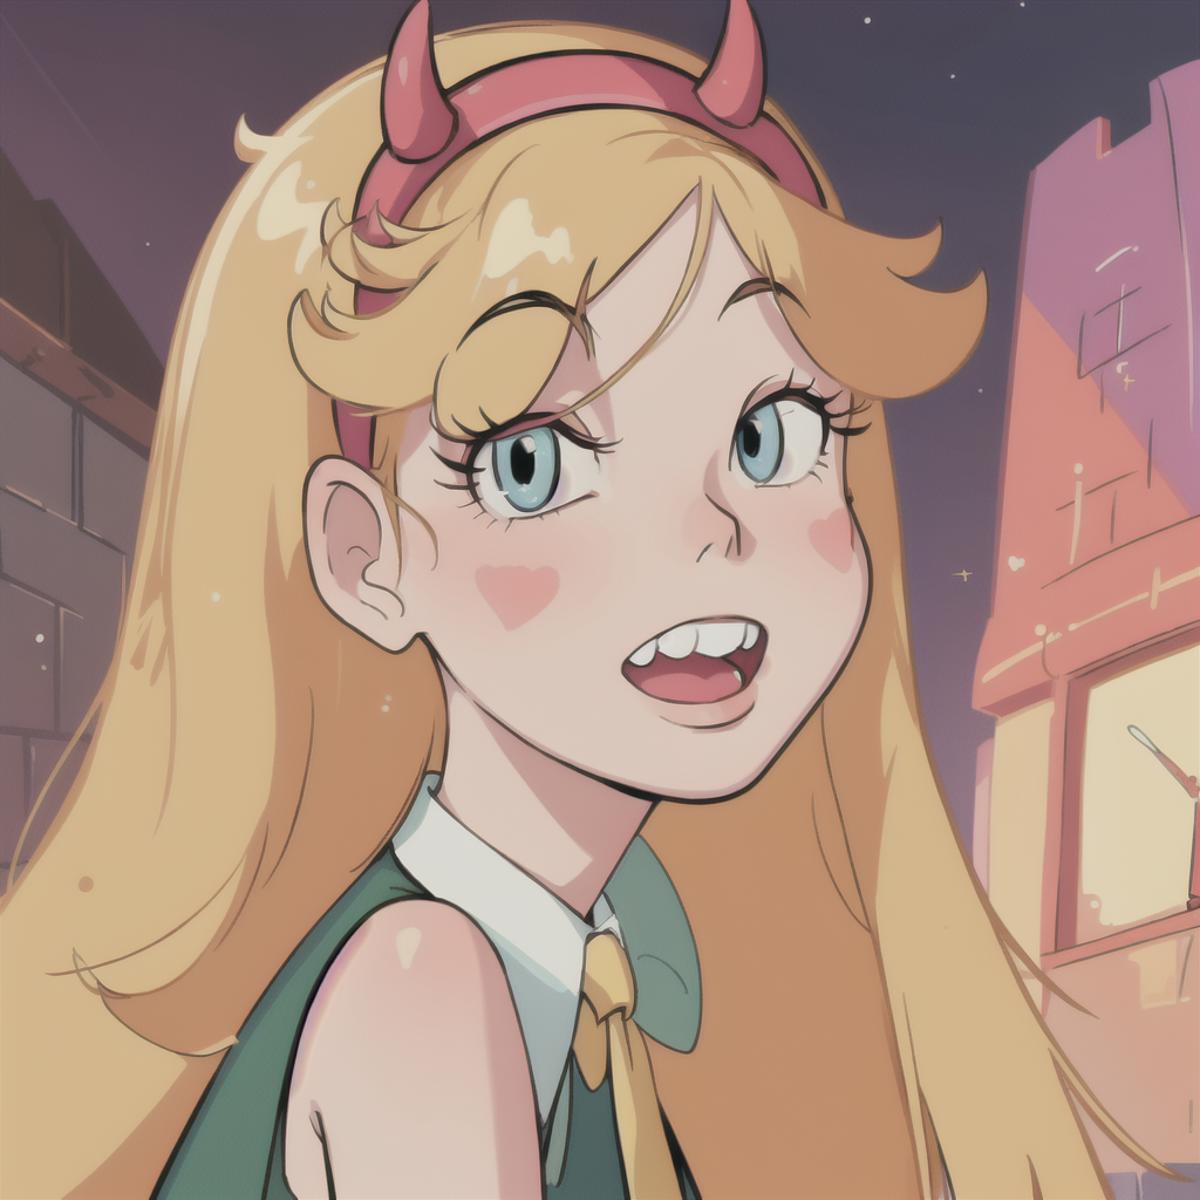 Star vs. the forces of evil - Star Butterfly image by starandmarco0o630